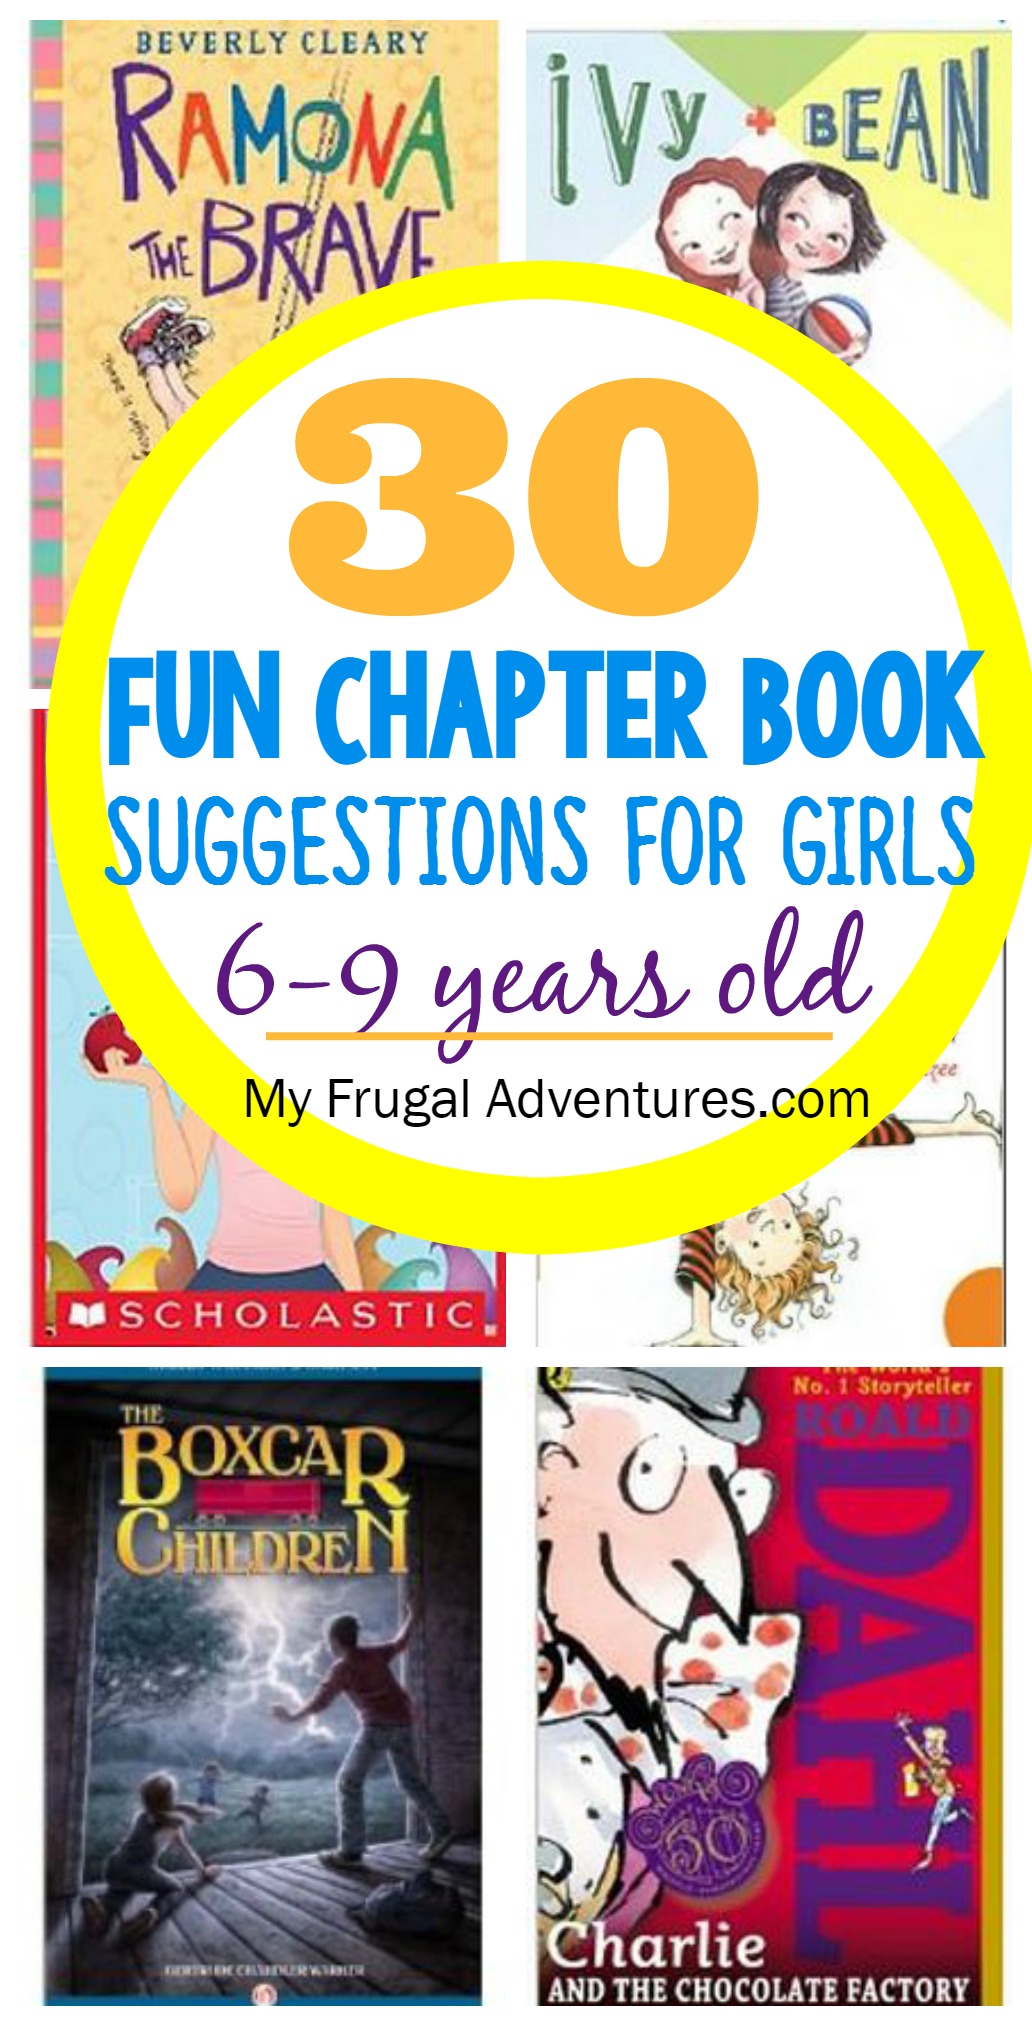 https://myfrugaladventures.com/wp-content/uploads/2015/05/Chapter-Book-Suggestions-for-Girls-6-9-years-old.jpg